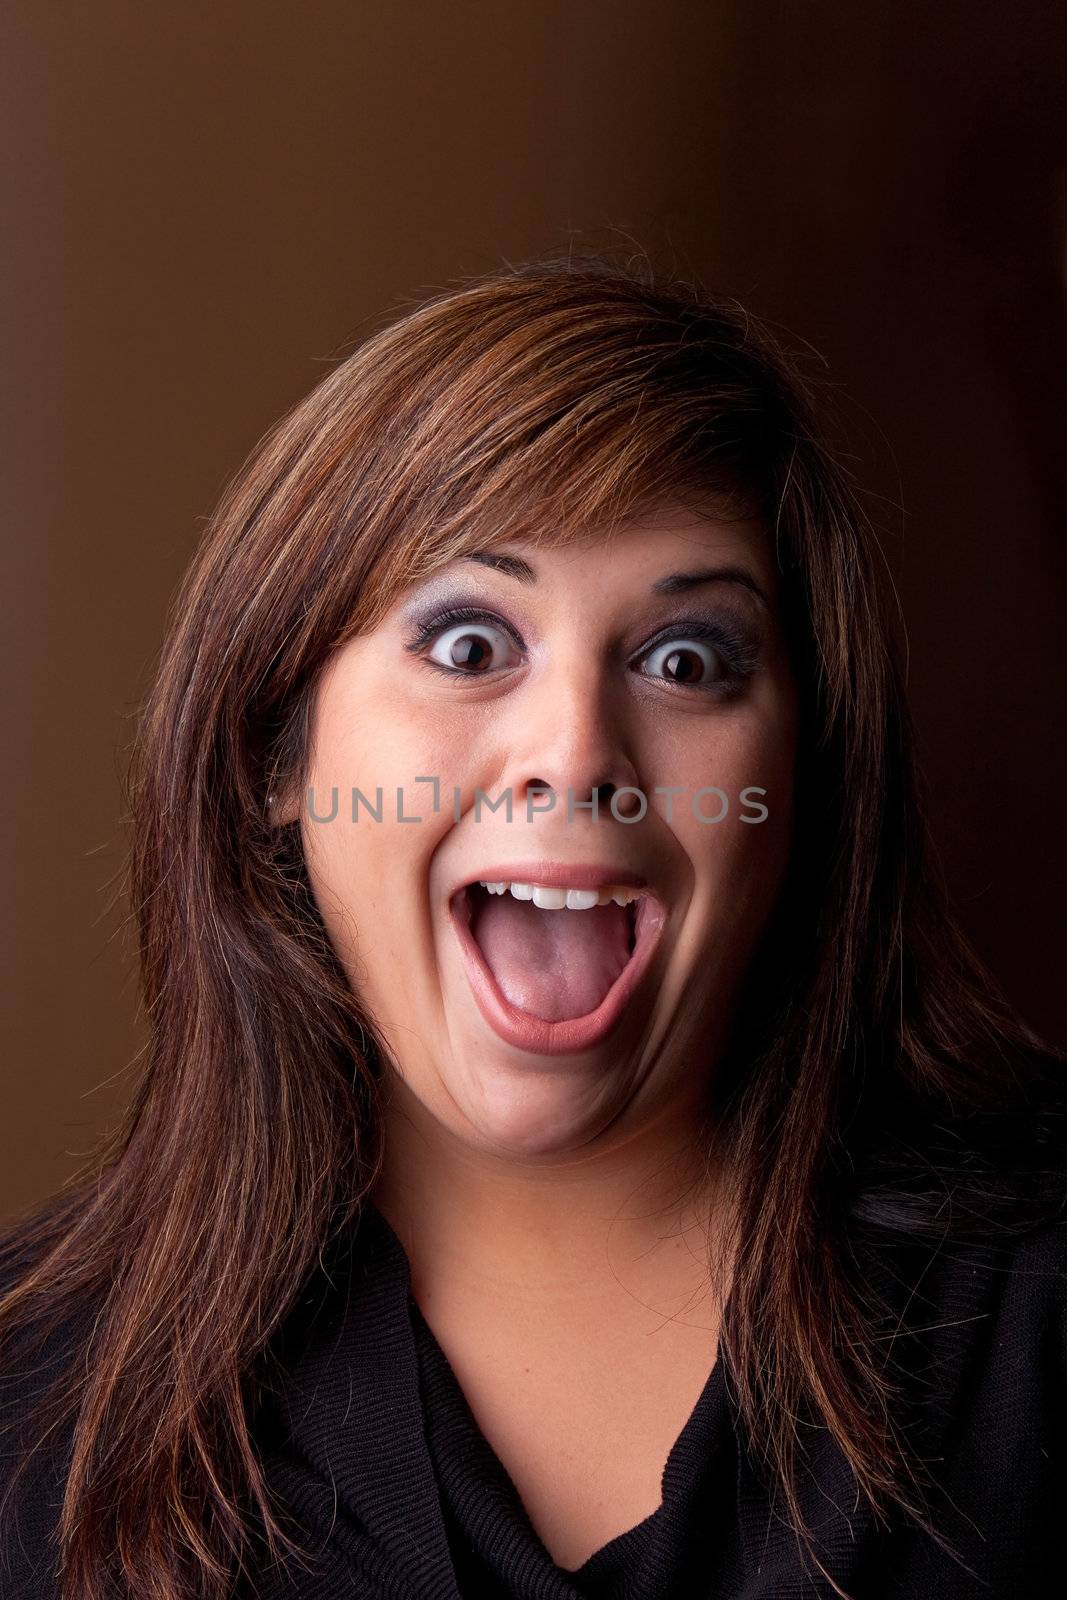 Woman with a funny look on her face smiles over a dark background.